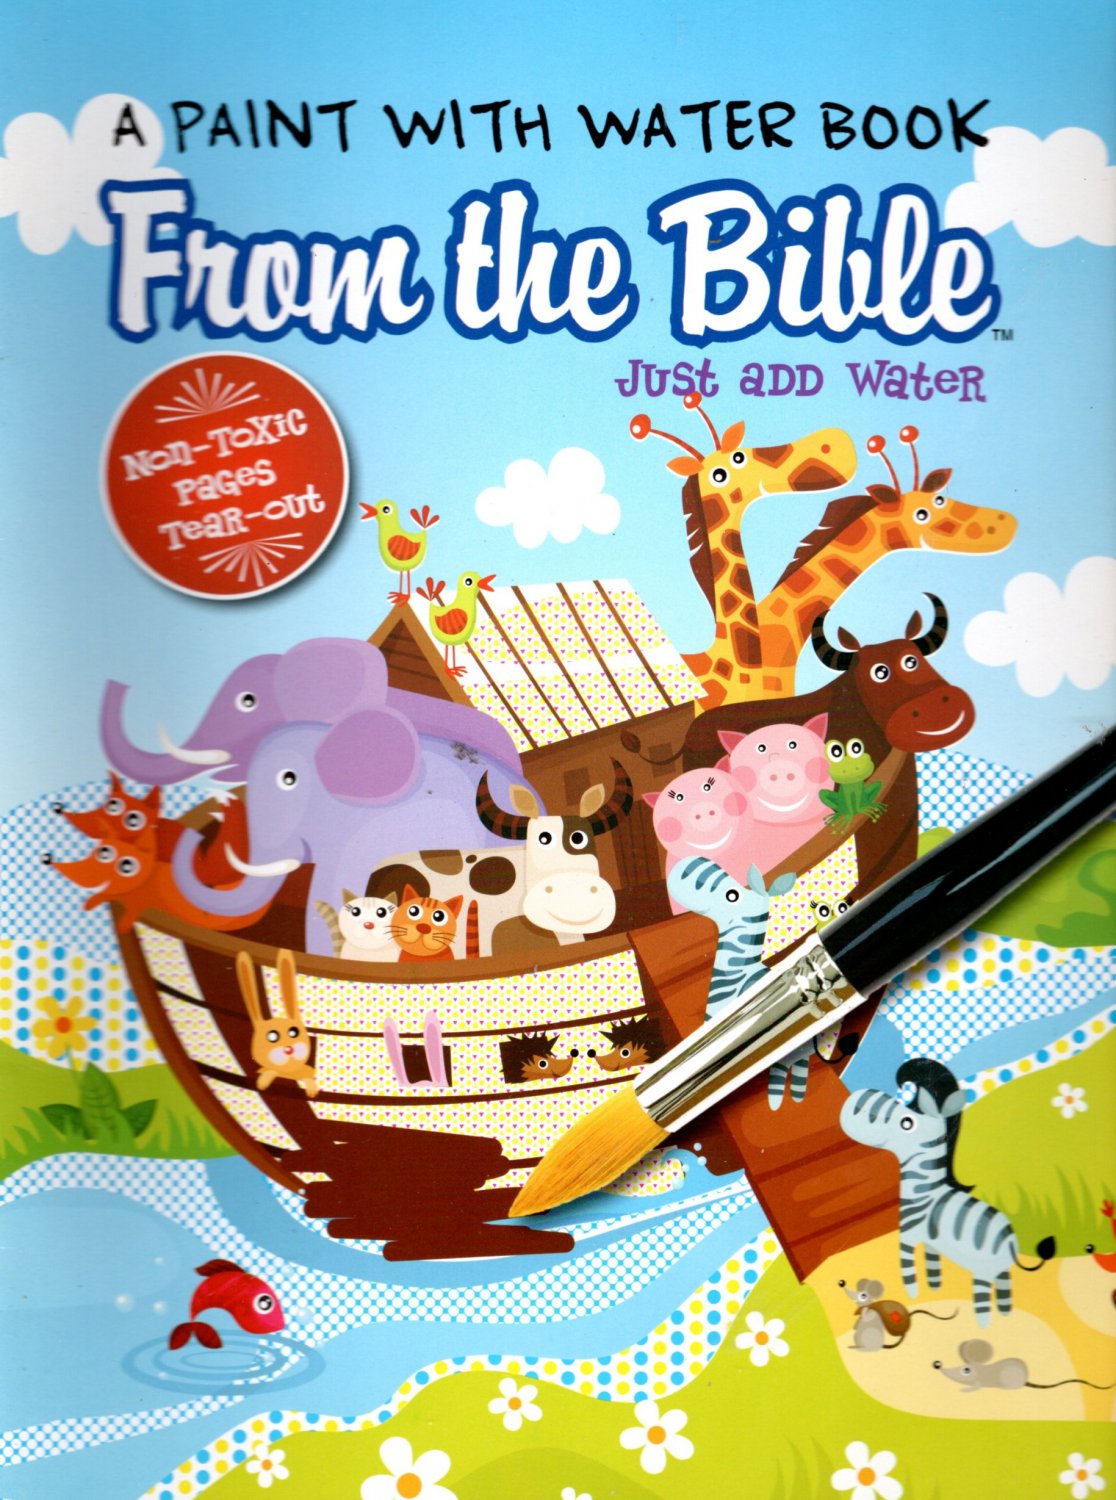 A Paint with Water - Book from the Bible - Just Add Water - Coloring Book